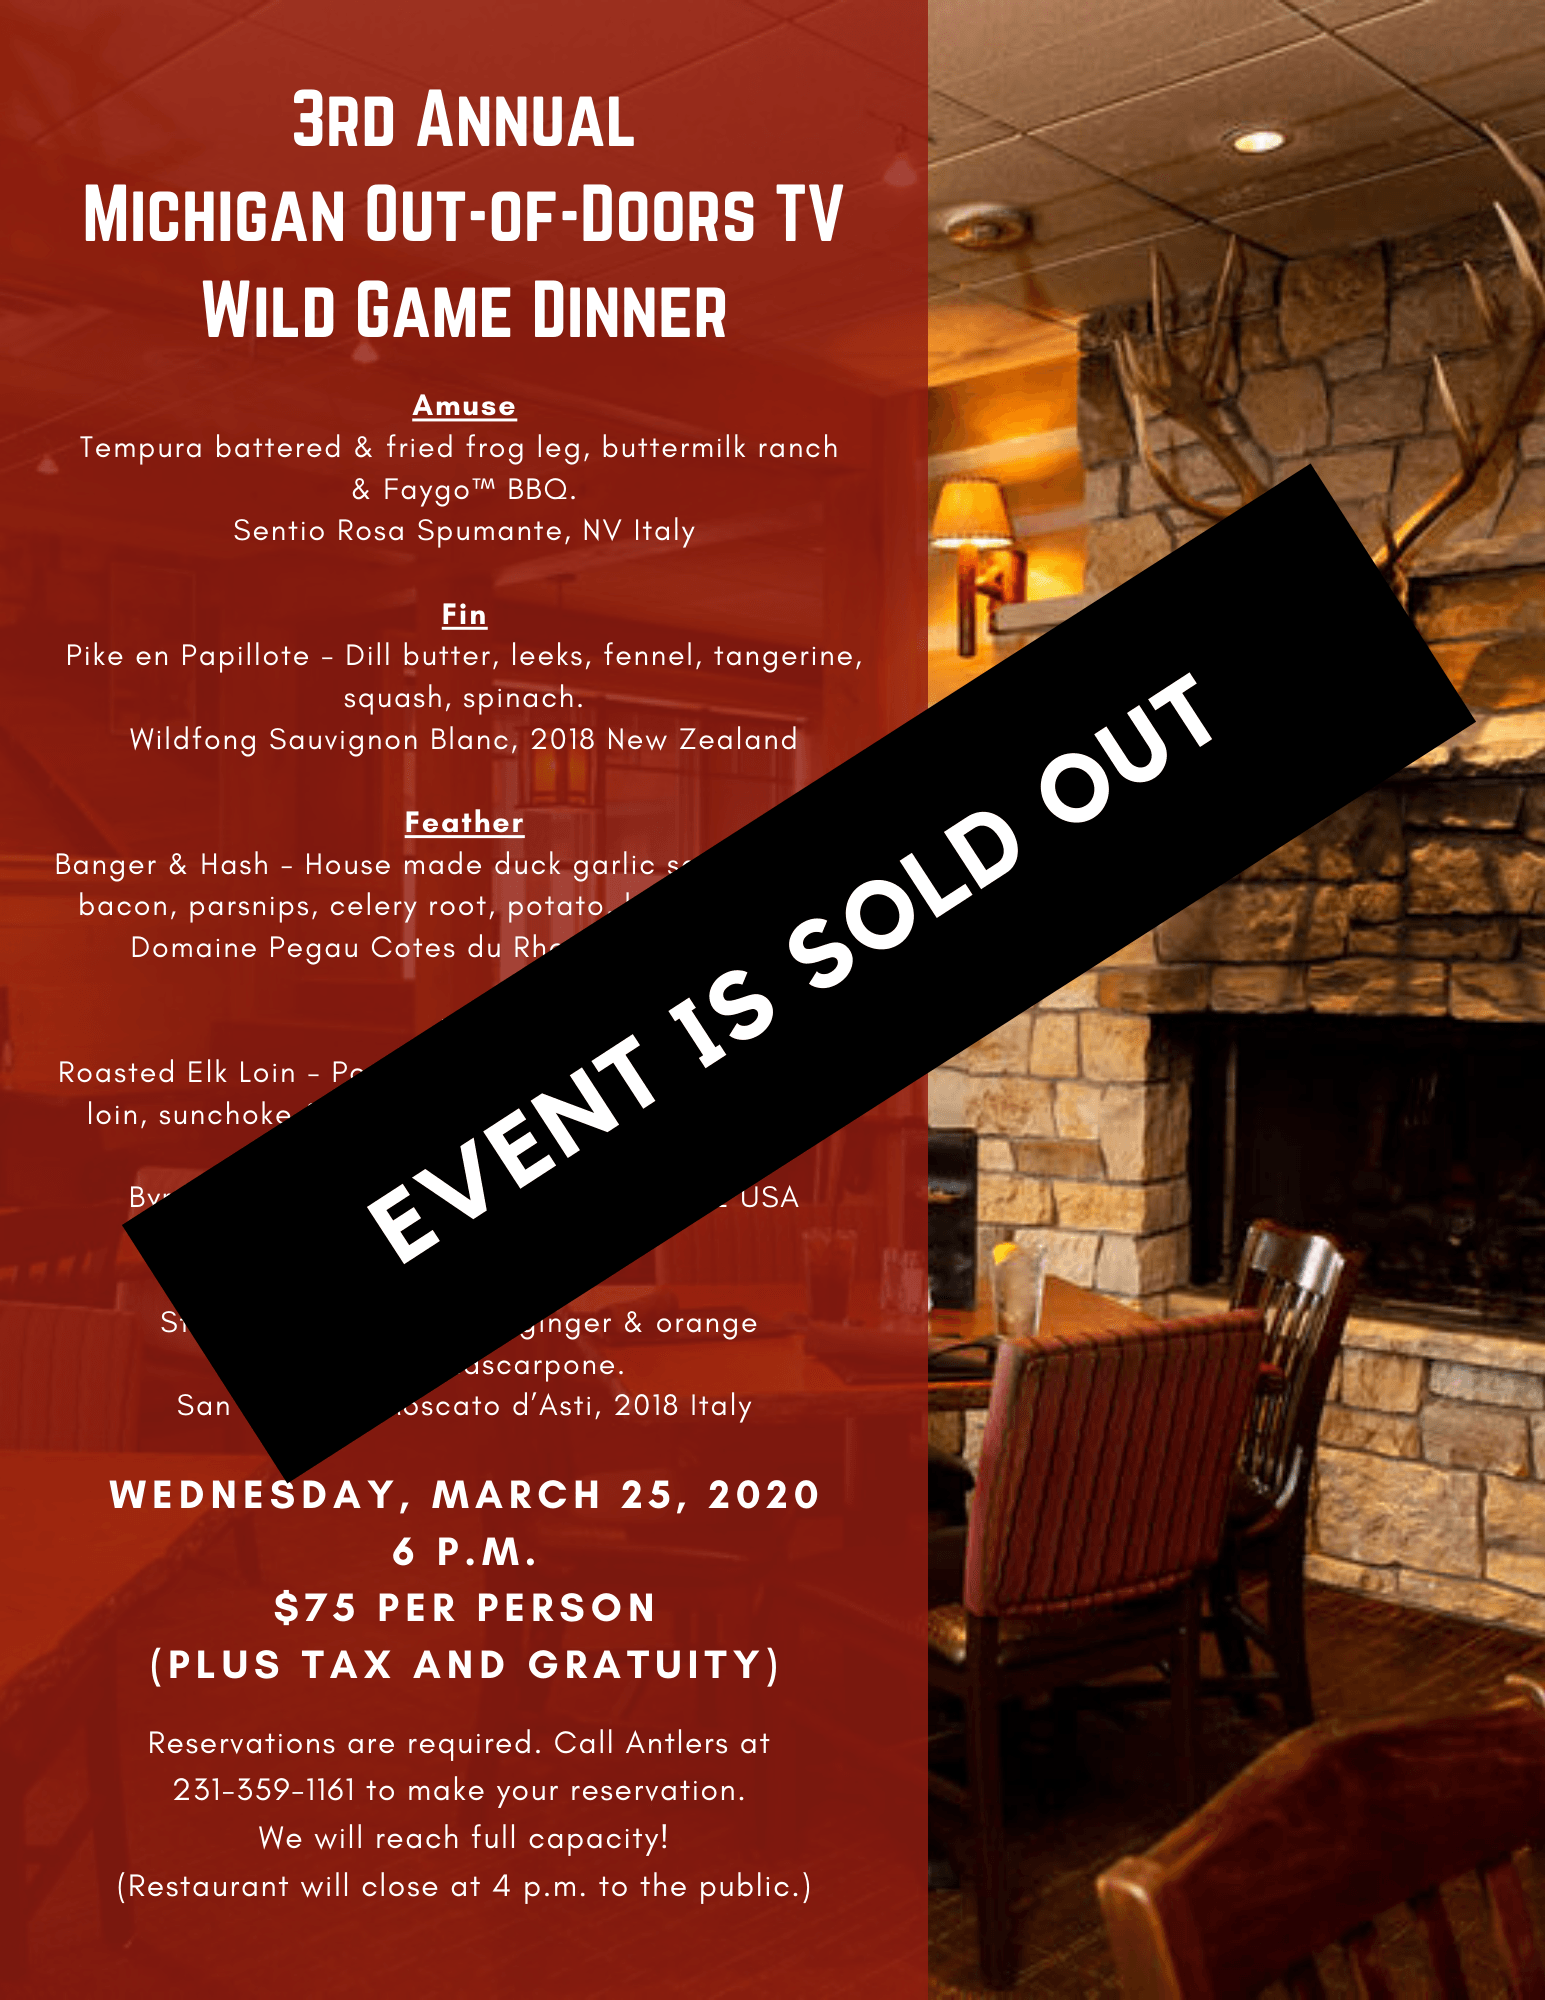 MICHIGAN OUT-OF-DOORS TV WILD GAME AND WINE DINNER event flyer